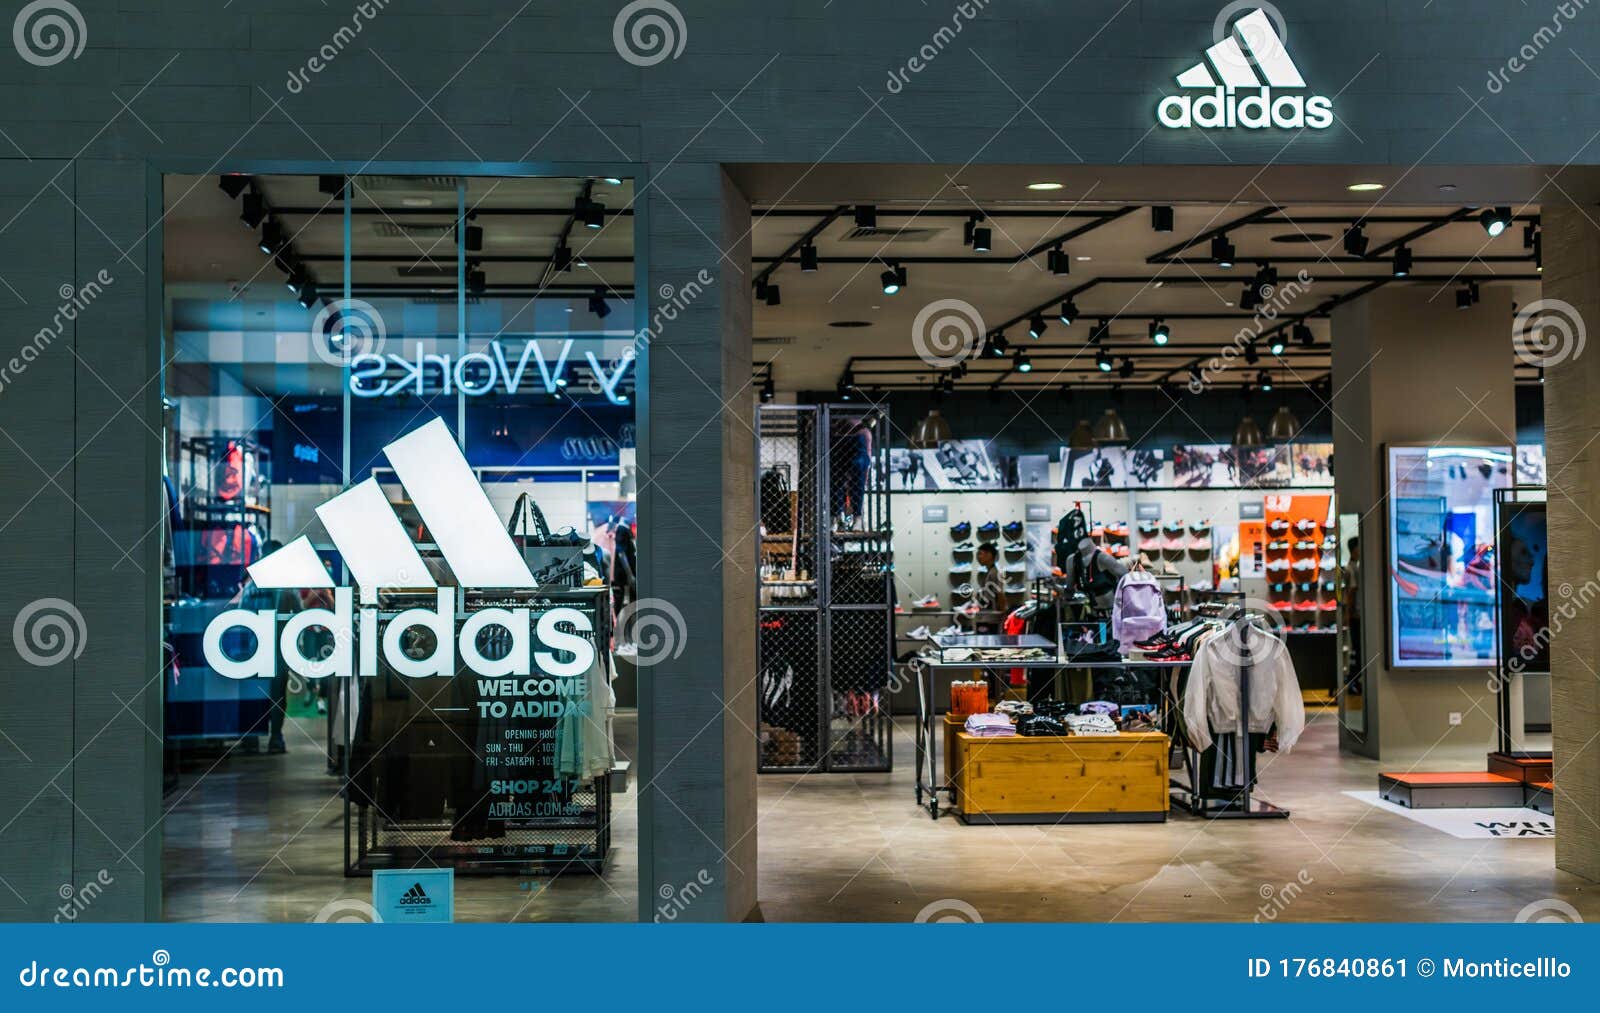 vision Spooky Mug Front Entrance To Adidas Store in Singapore Shopping Mall Editorial Photo -  Image of logo, global: 176840861